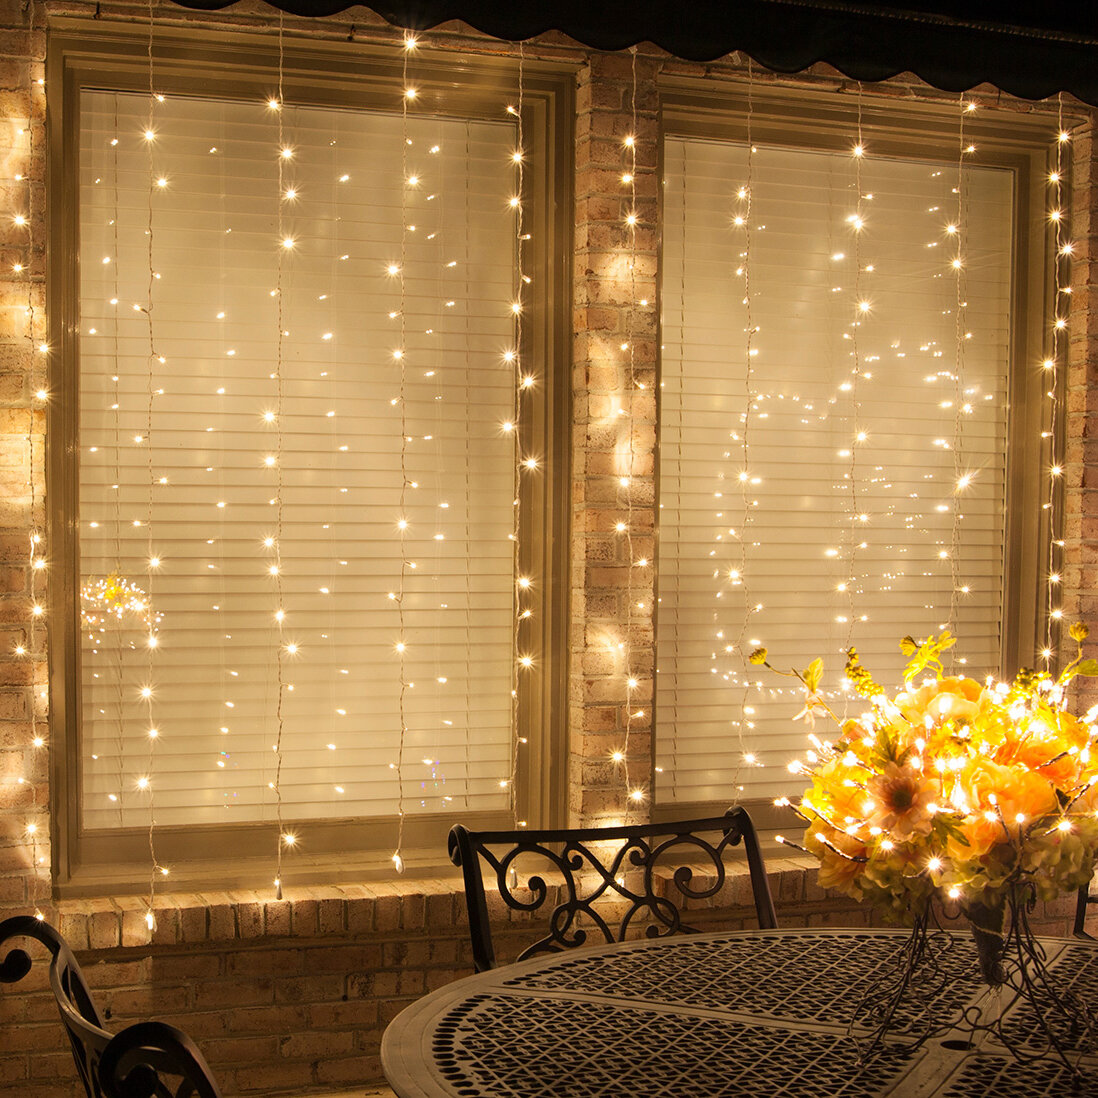 Details about     Yule Rite 300 Clear Indoor/Outdoor Curtain Miniature Lights White Cord 